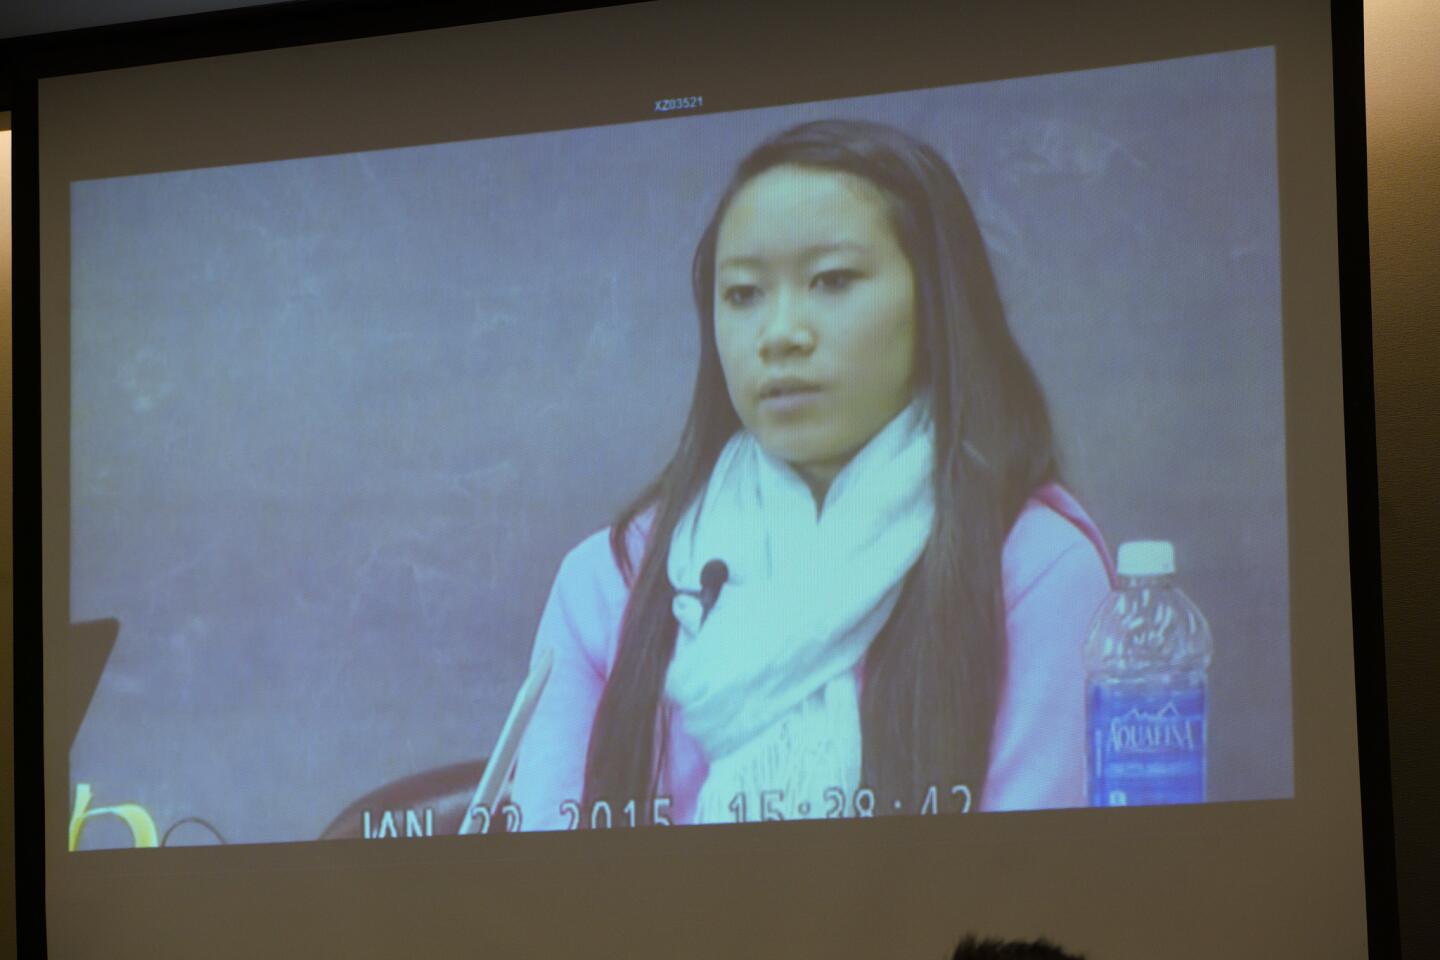 Day 6 of the civil trial for the wrongful death of Rebecca Zahau